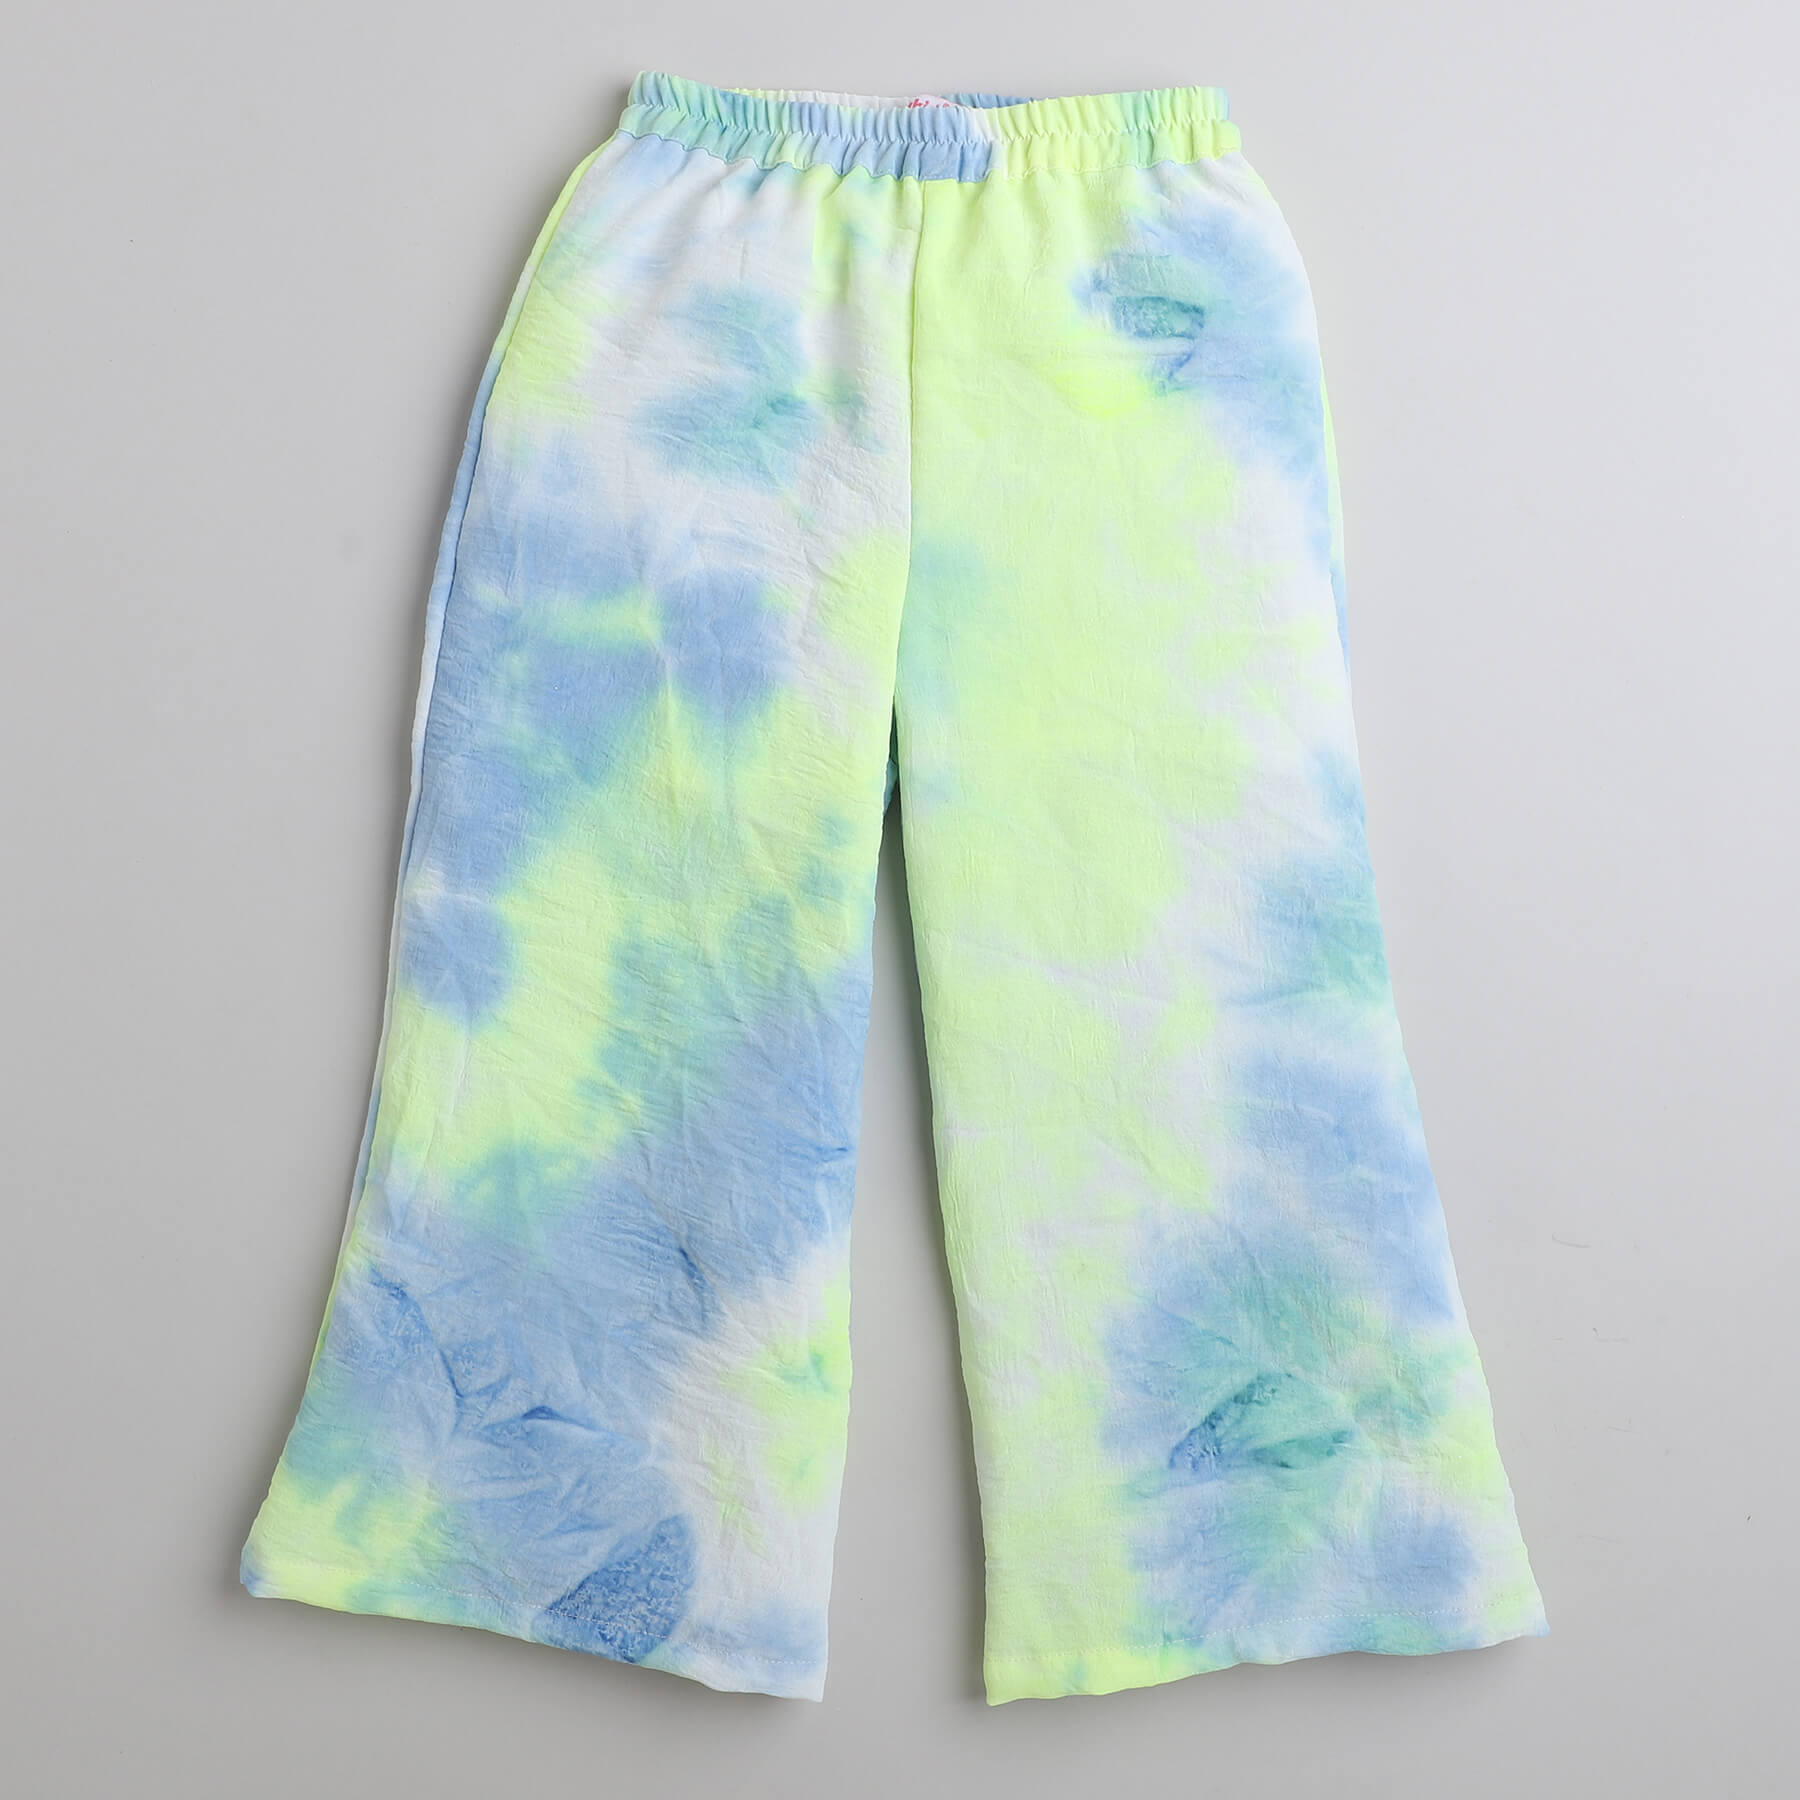 Taffykids tie dye full sleeves waist tie up shirt with matching pant co-ord set-Neon Yellow/blue